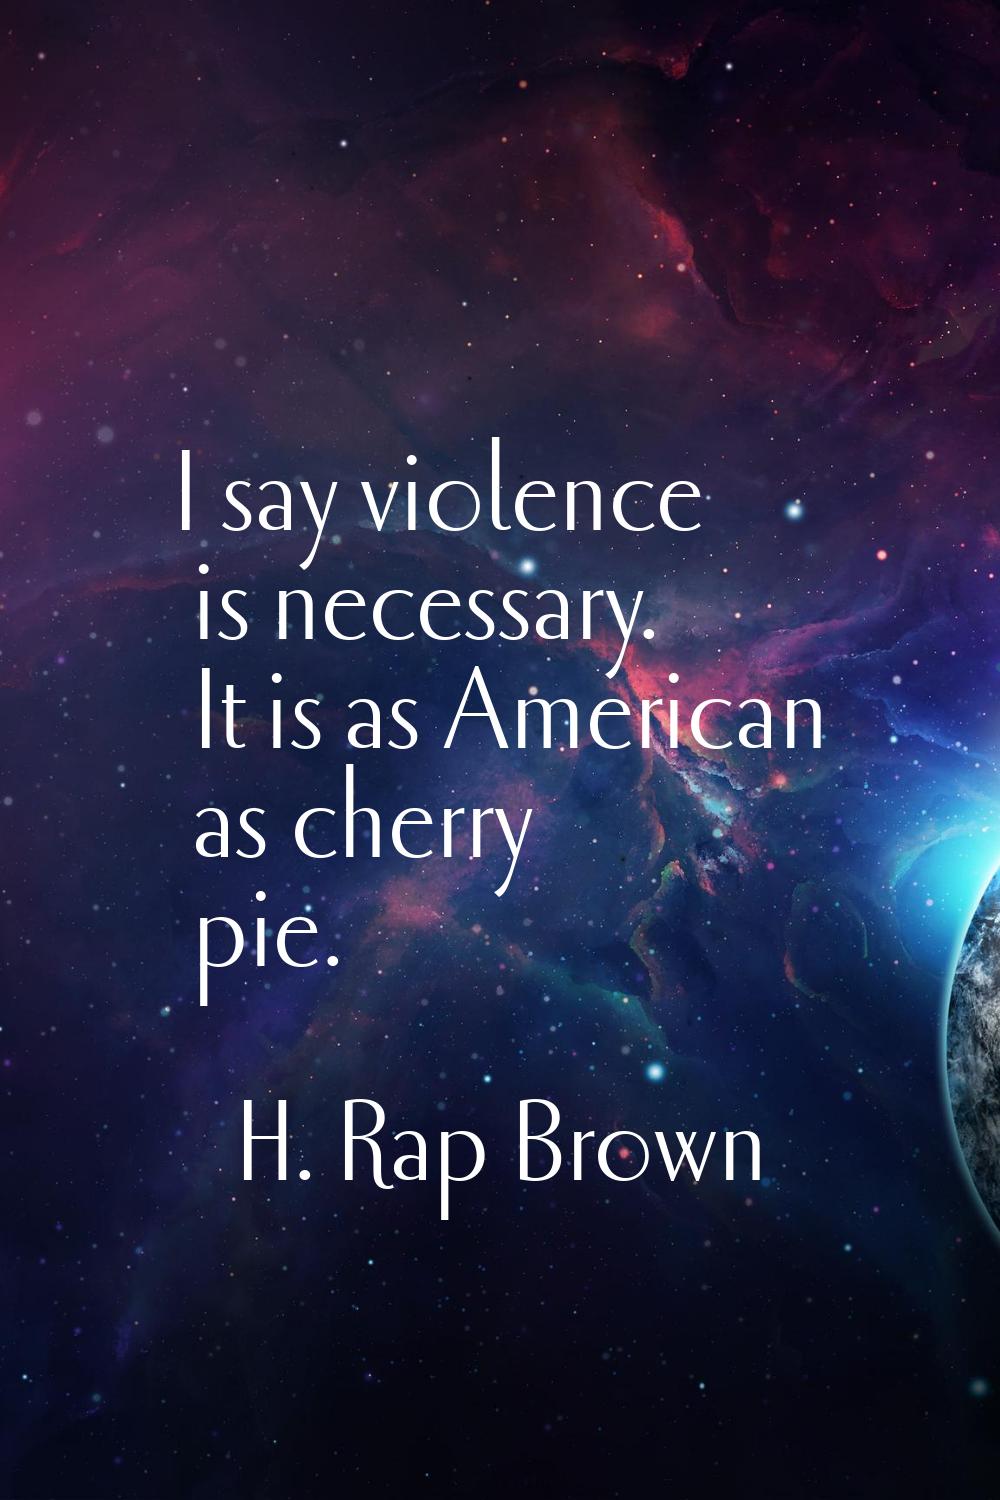 I say violence is necessary. It is as American as cherry pie.